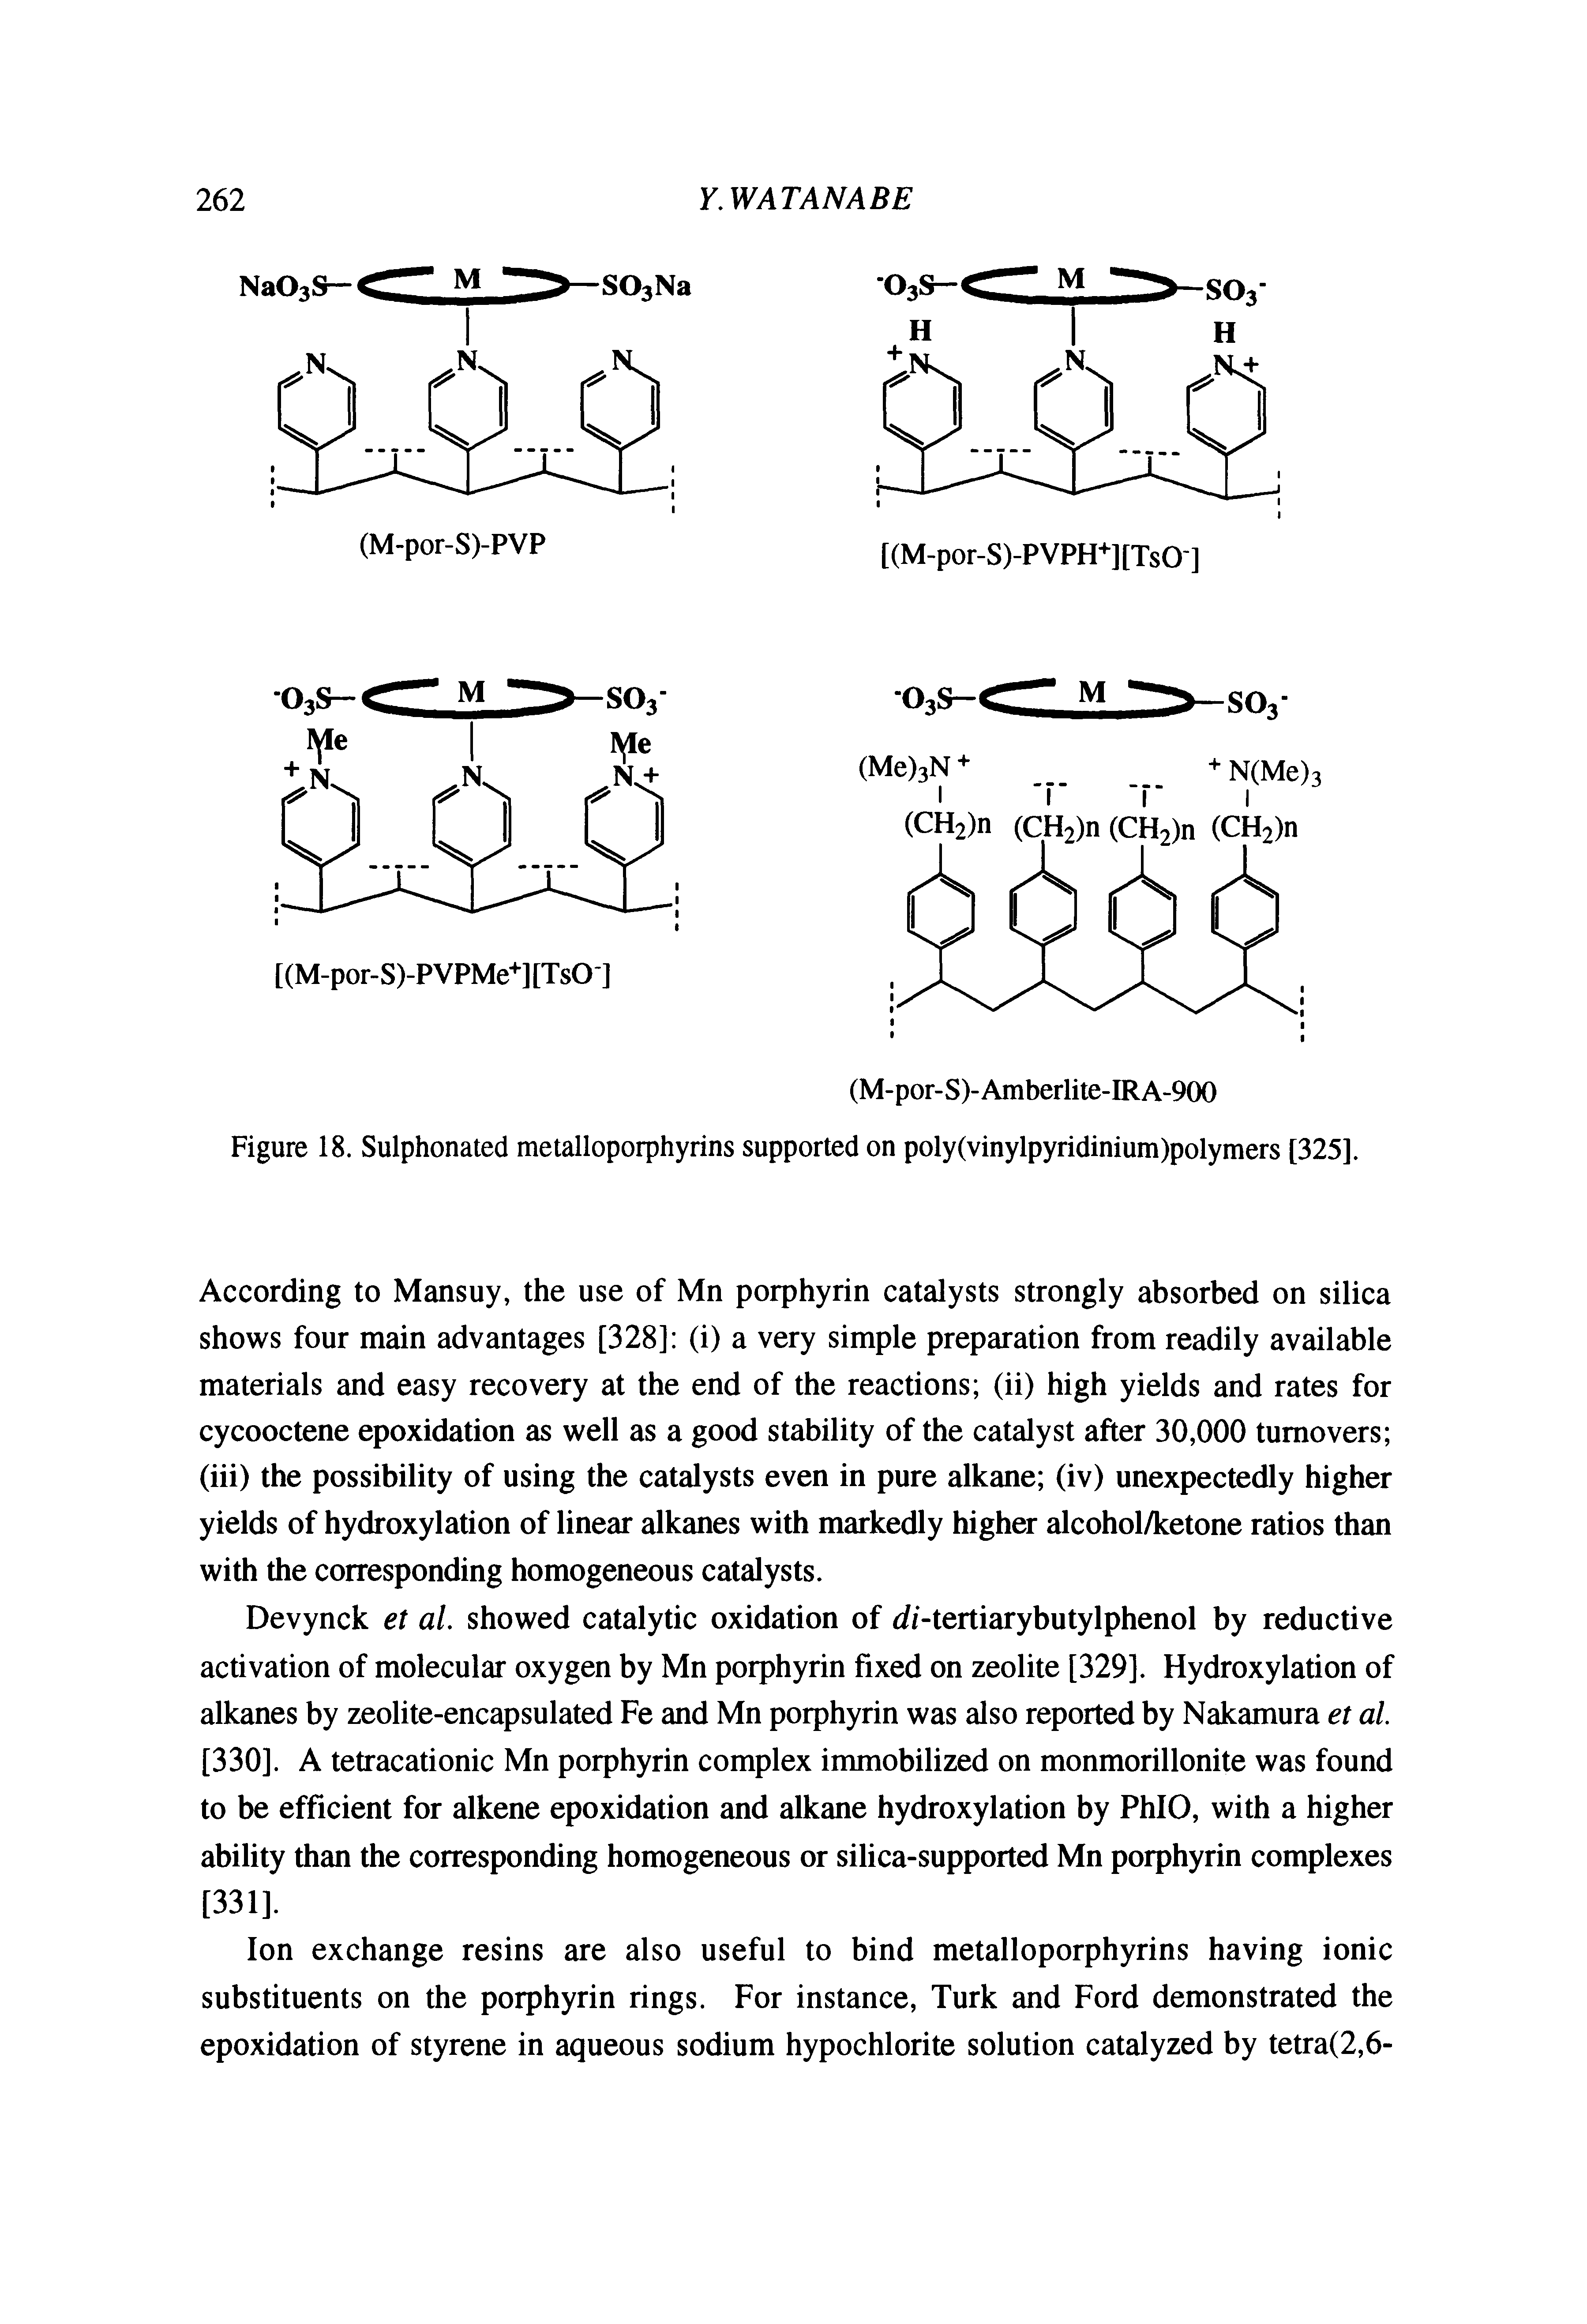 Figure 18. Sulphonated metalloporphyrins supported on poly(vinylpyridinium)polymers [325].